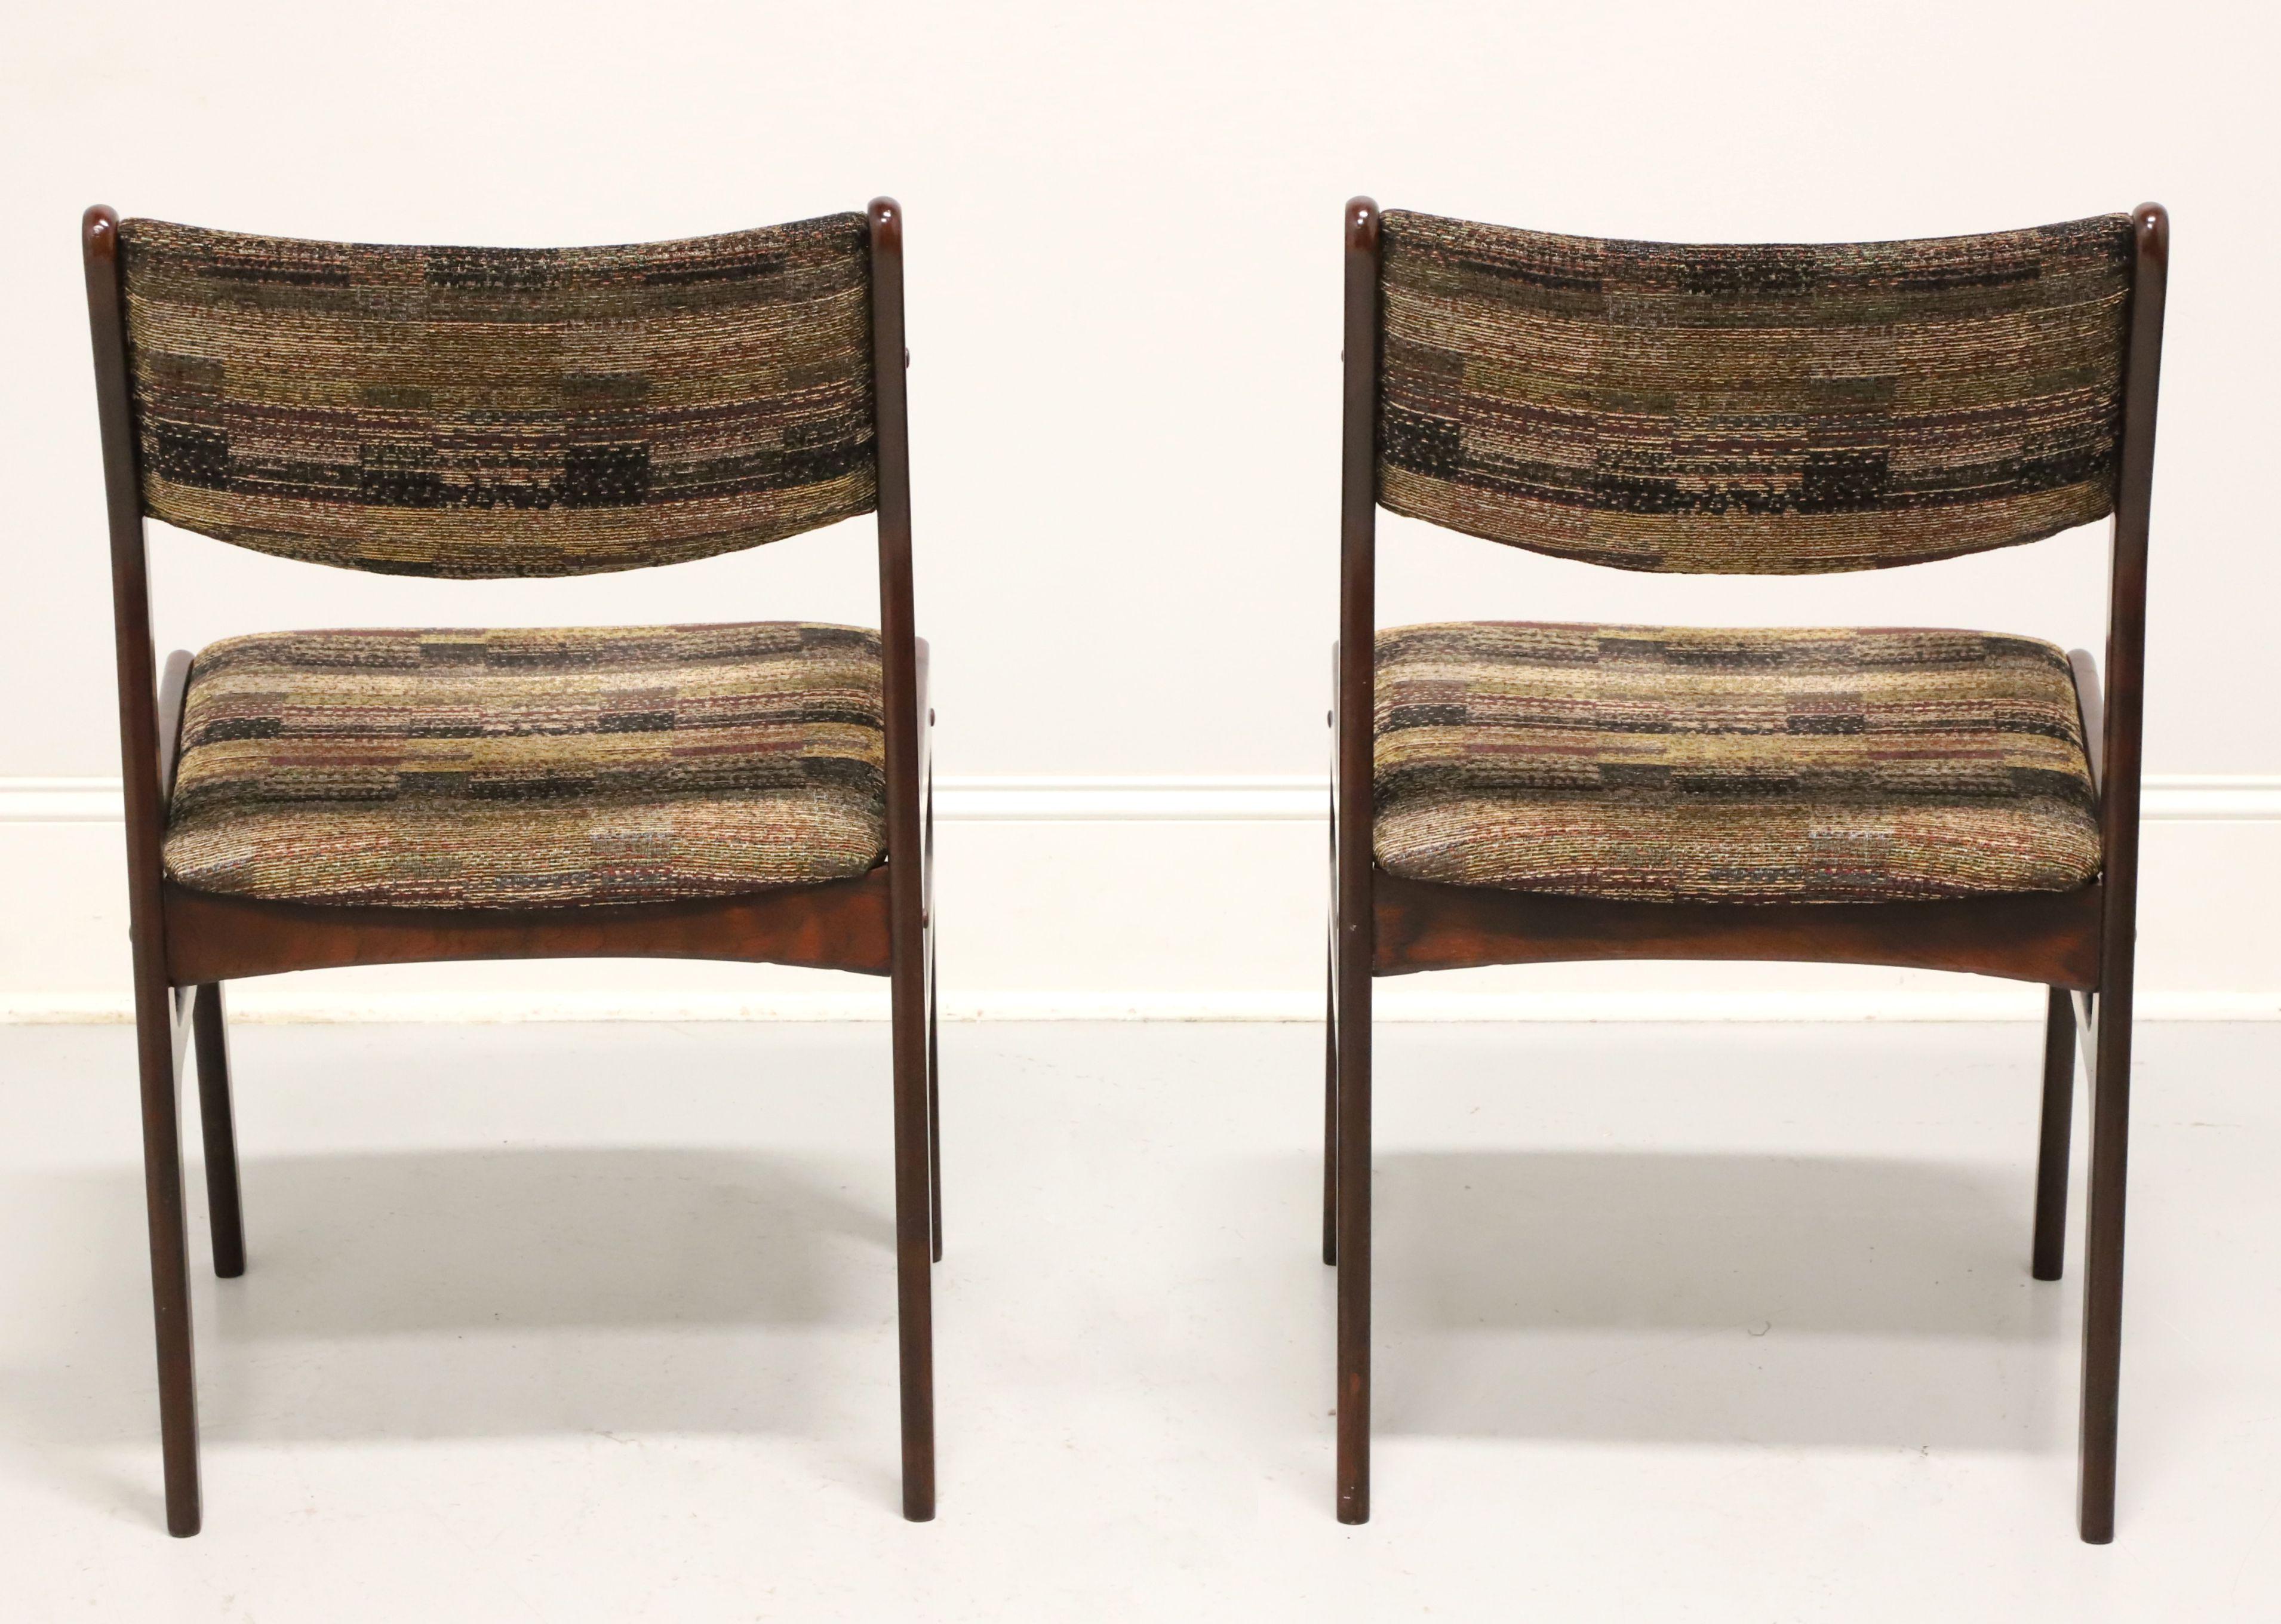 DYRLUND Mid 20th Century Rosewood Danish Modern Dining Side Chairs - Pair B In Good Condition For Sale In Charlotte, NC